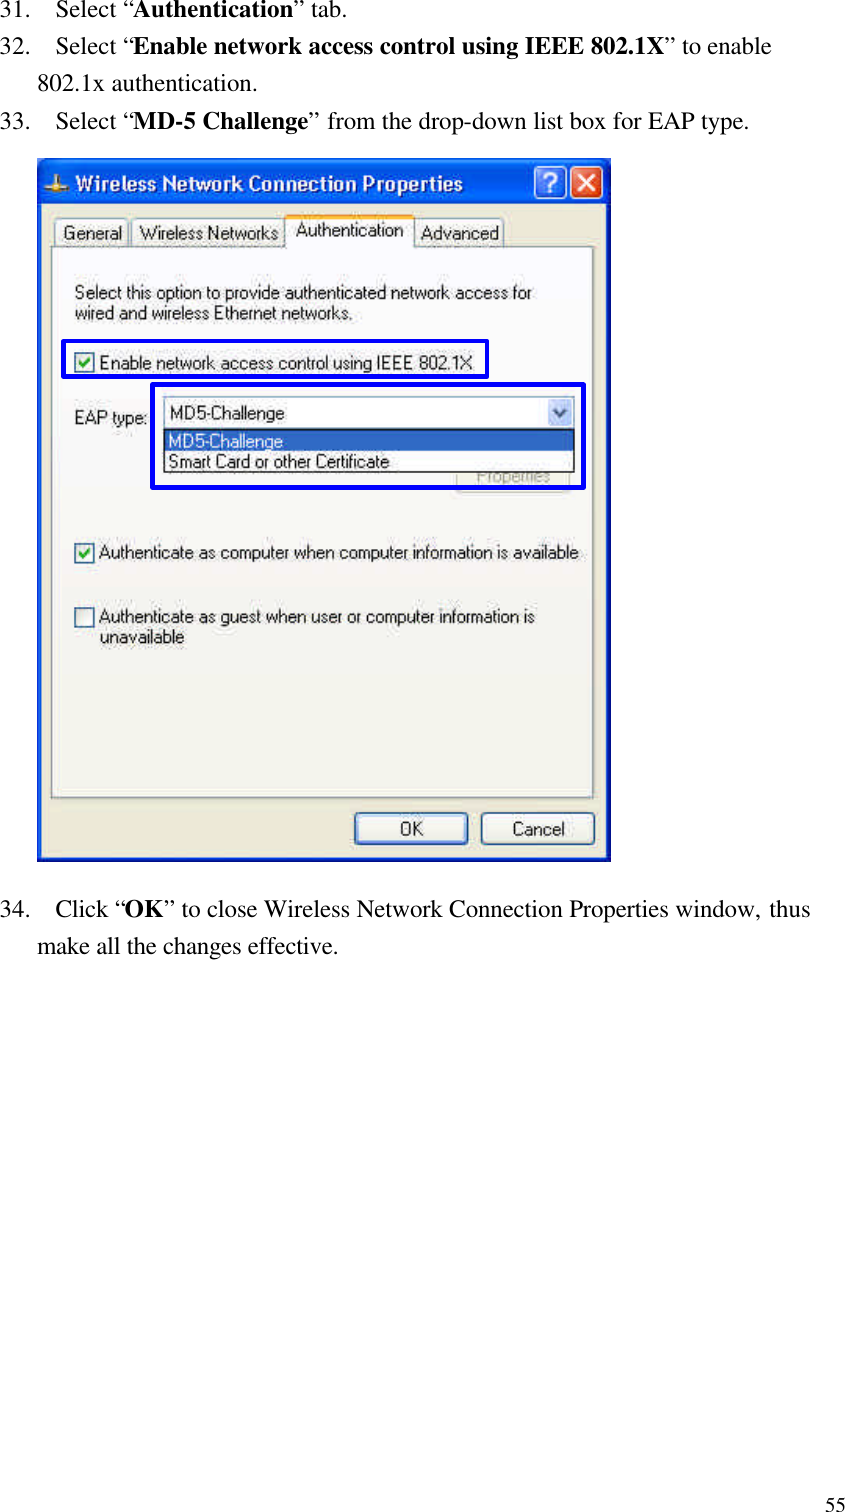  5531. Select “Authentication” tab. 32. Select “Enable network access control using IEEE 802.1X” to enable 802.1x authentication. 33. Select “MD-5 Challenge” from the drop-down list box for EAP type.                     34. Click “OK” to close Wireless Network Connection Properties window, thus make all the changes effective. 